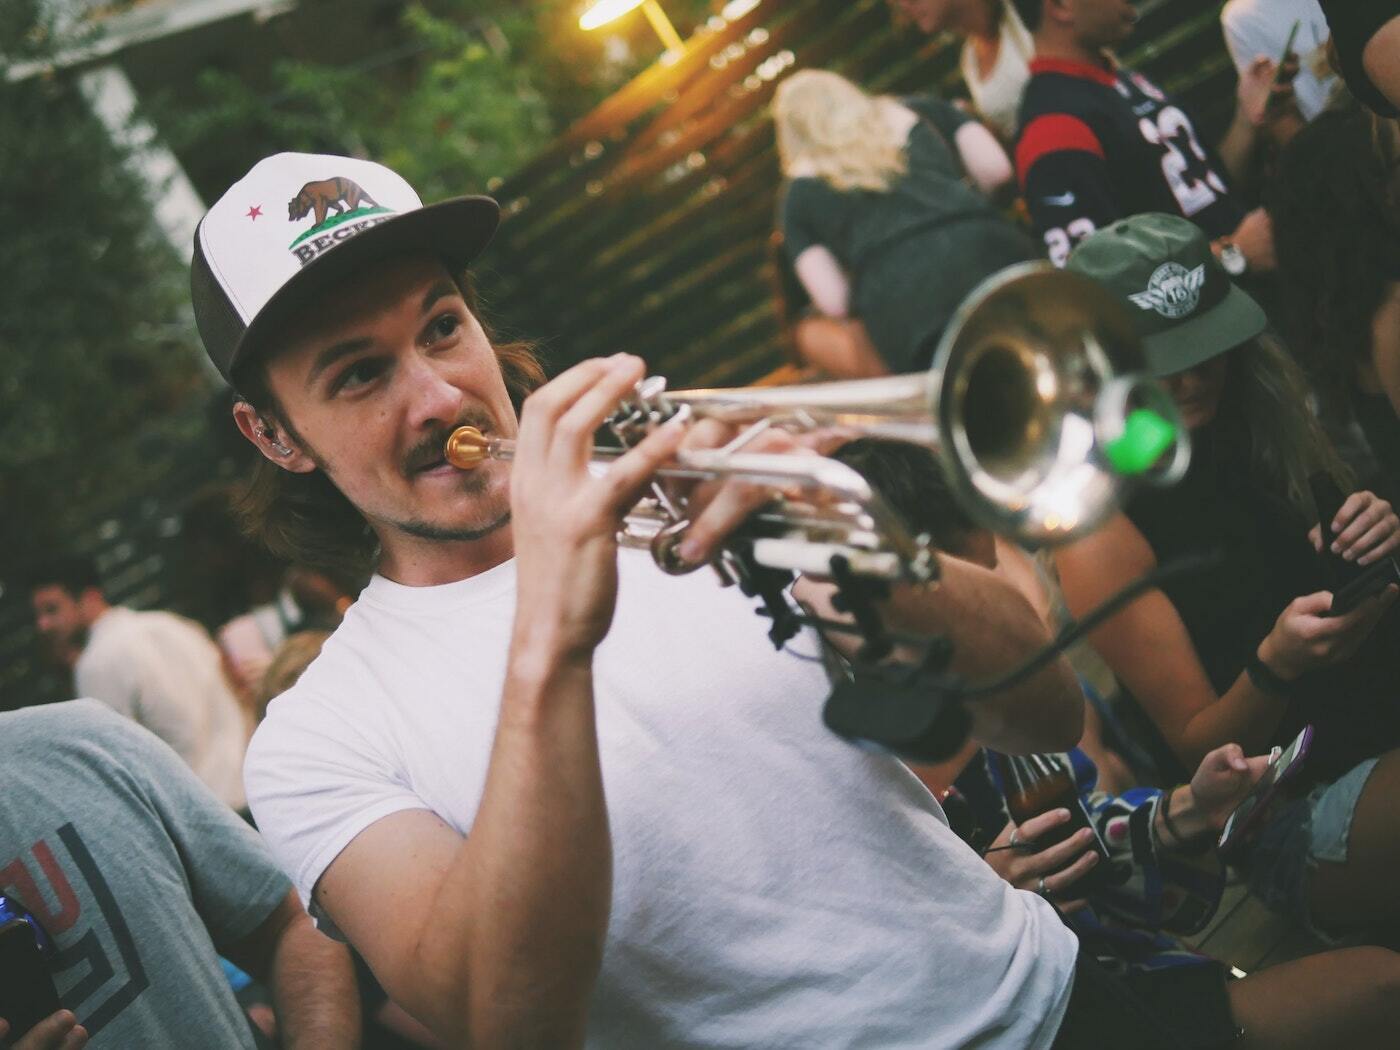 Man plays trumpet in Austin, which is known for its amazing live music scene.